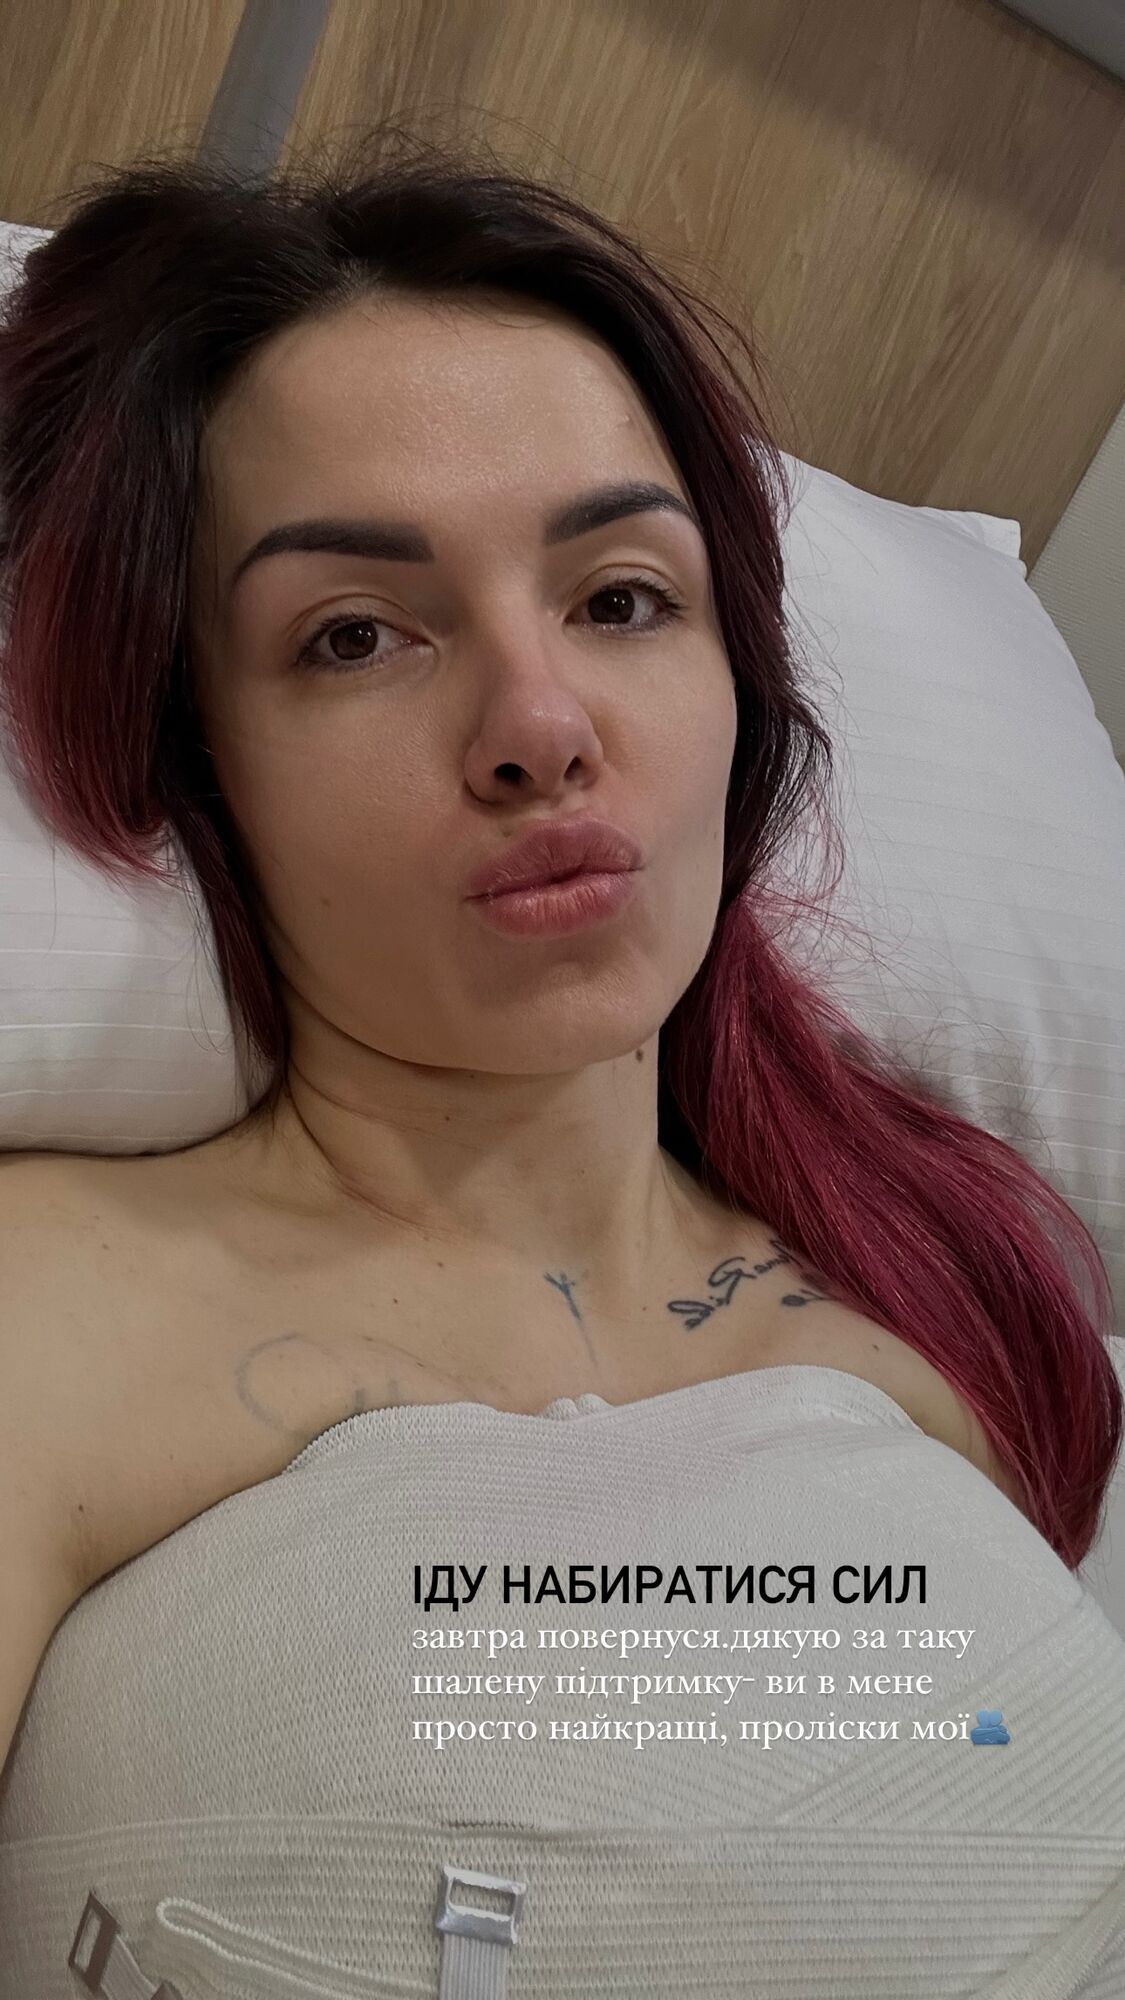 Ukrainian blogger MamaRika shows the first photo after breast augmentation, talking about self love: fans point out hypocrisy